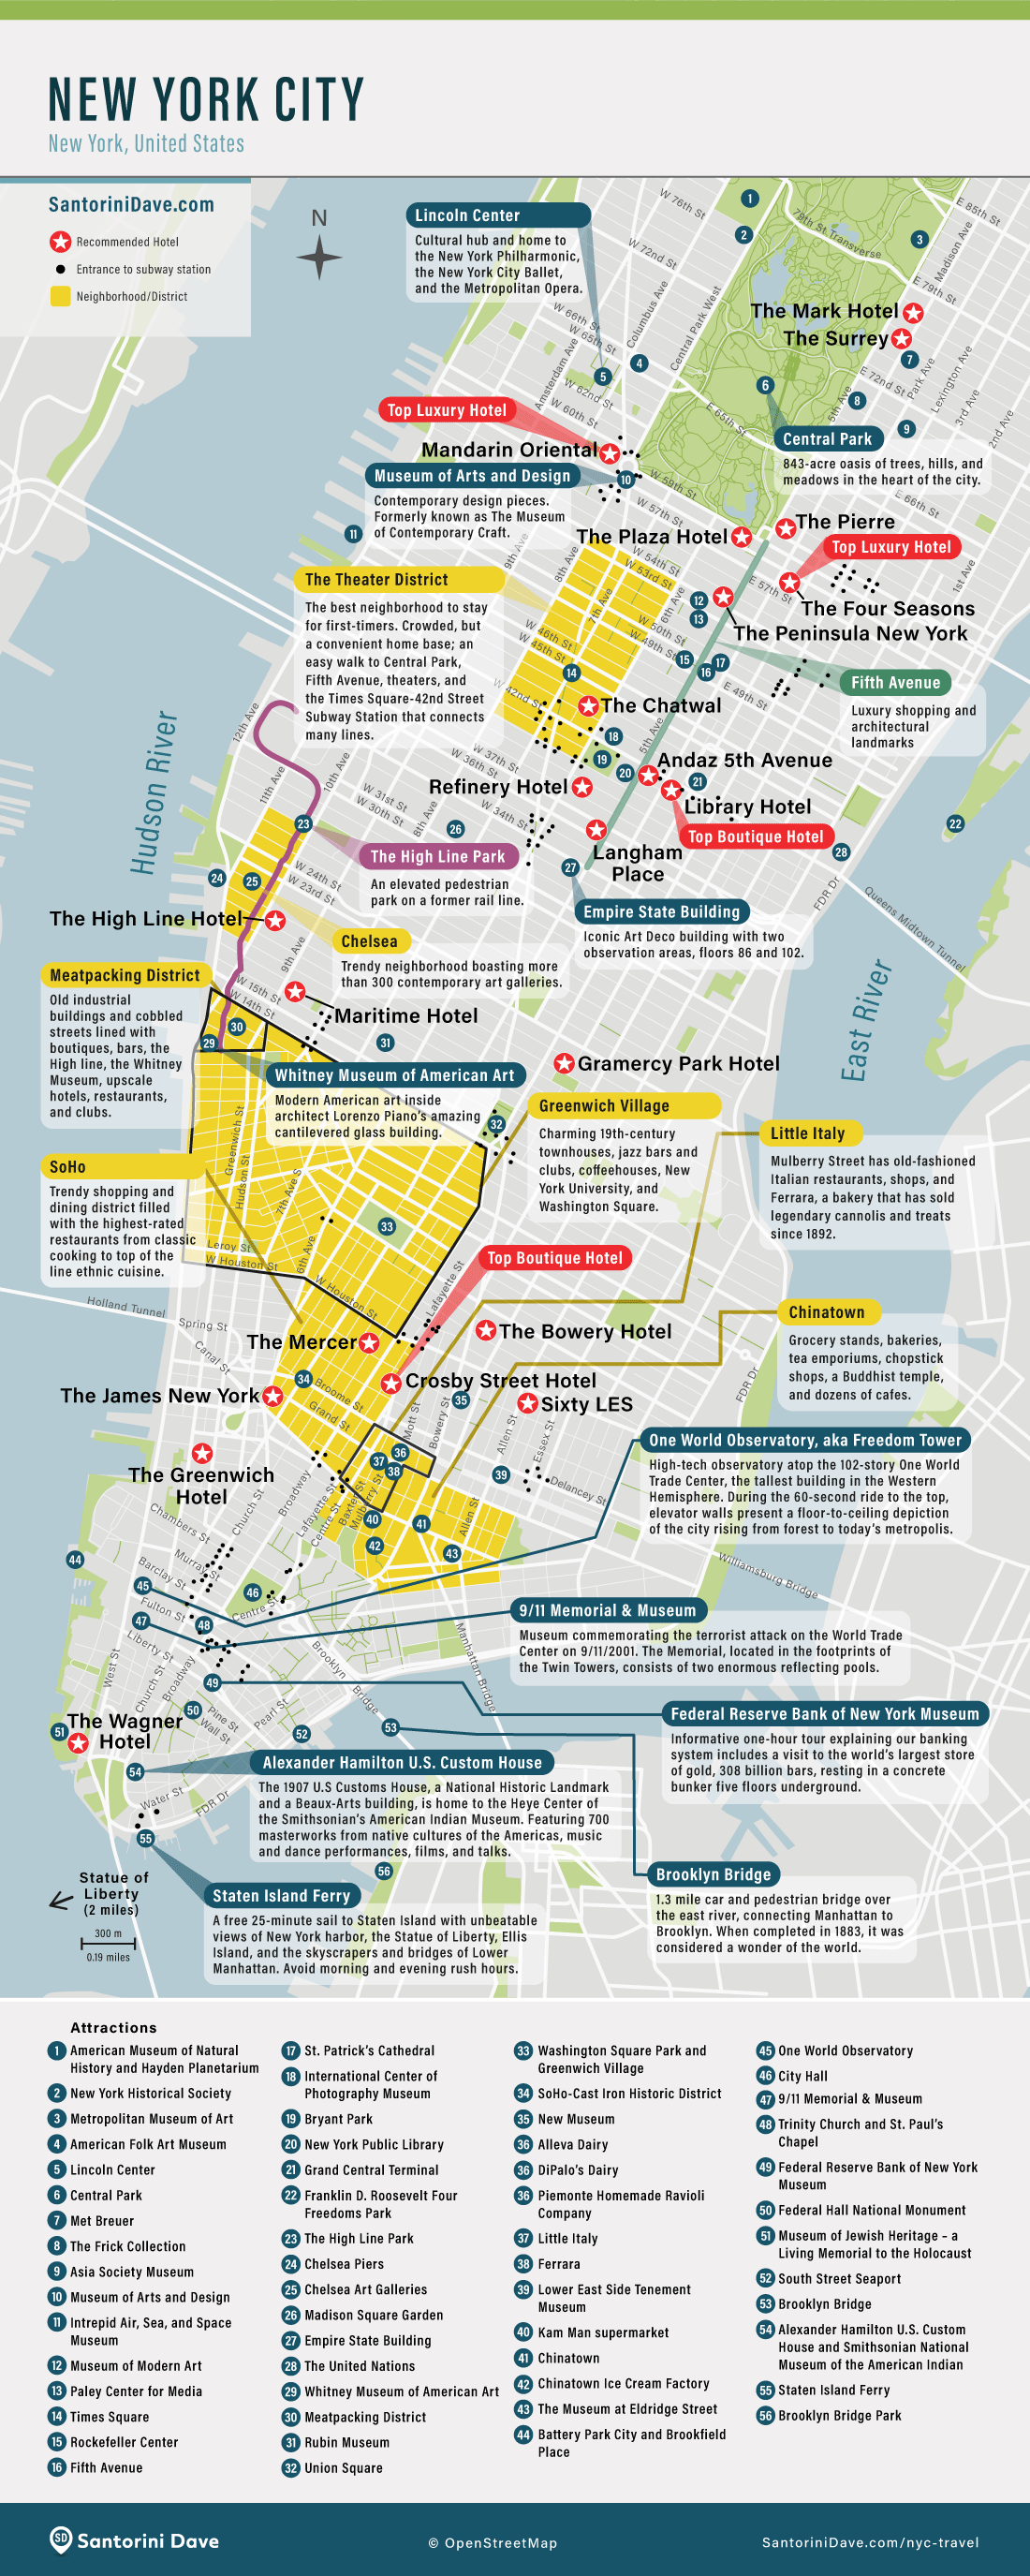 Map of New York City - Hotels, Neighborhoods, and Attractions.